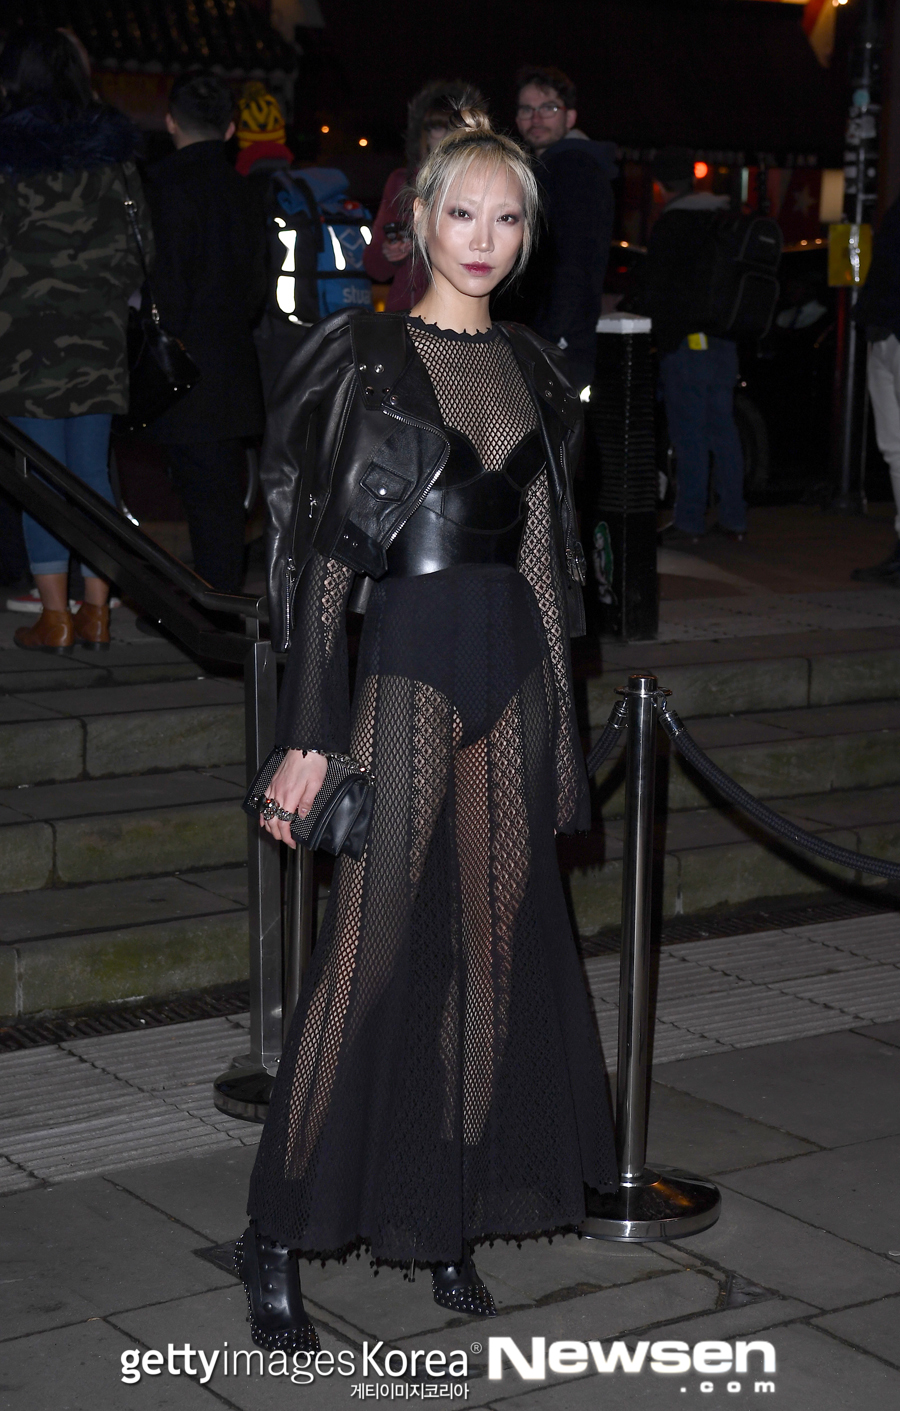 Model Soo-Joo attended a luxury fundraiser during 2019 London Fashion Week at the London Roundhouse in the UK on February 18 (local time).Soo-Joo poses on the day.Meanwhile, Soo-Joo has been dating French photographer Jack Waterlatt, 32, for about two years and split in January.Jung Yu-jin